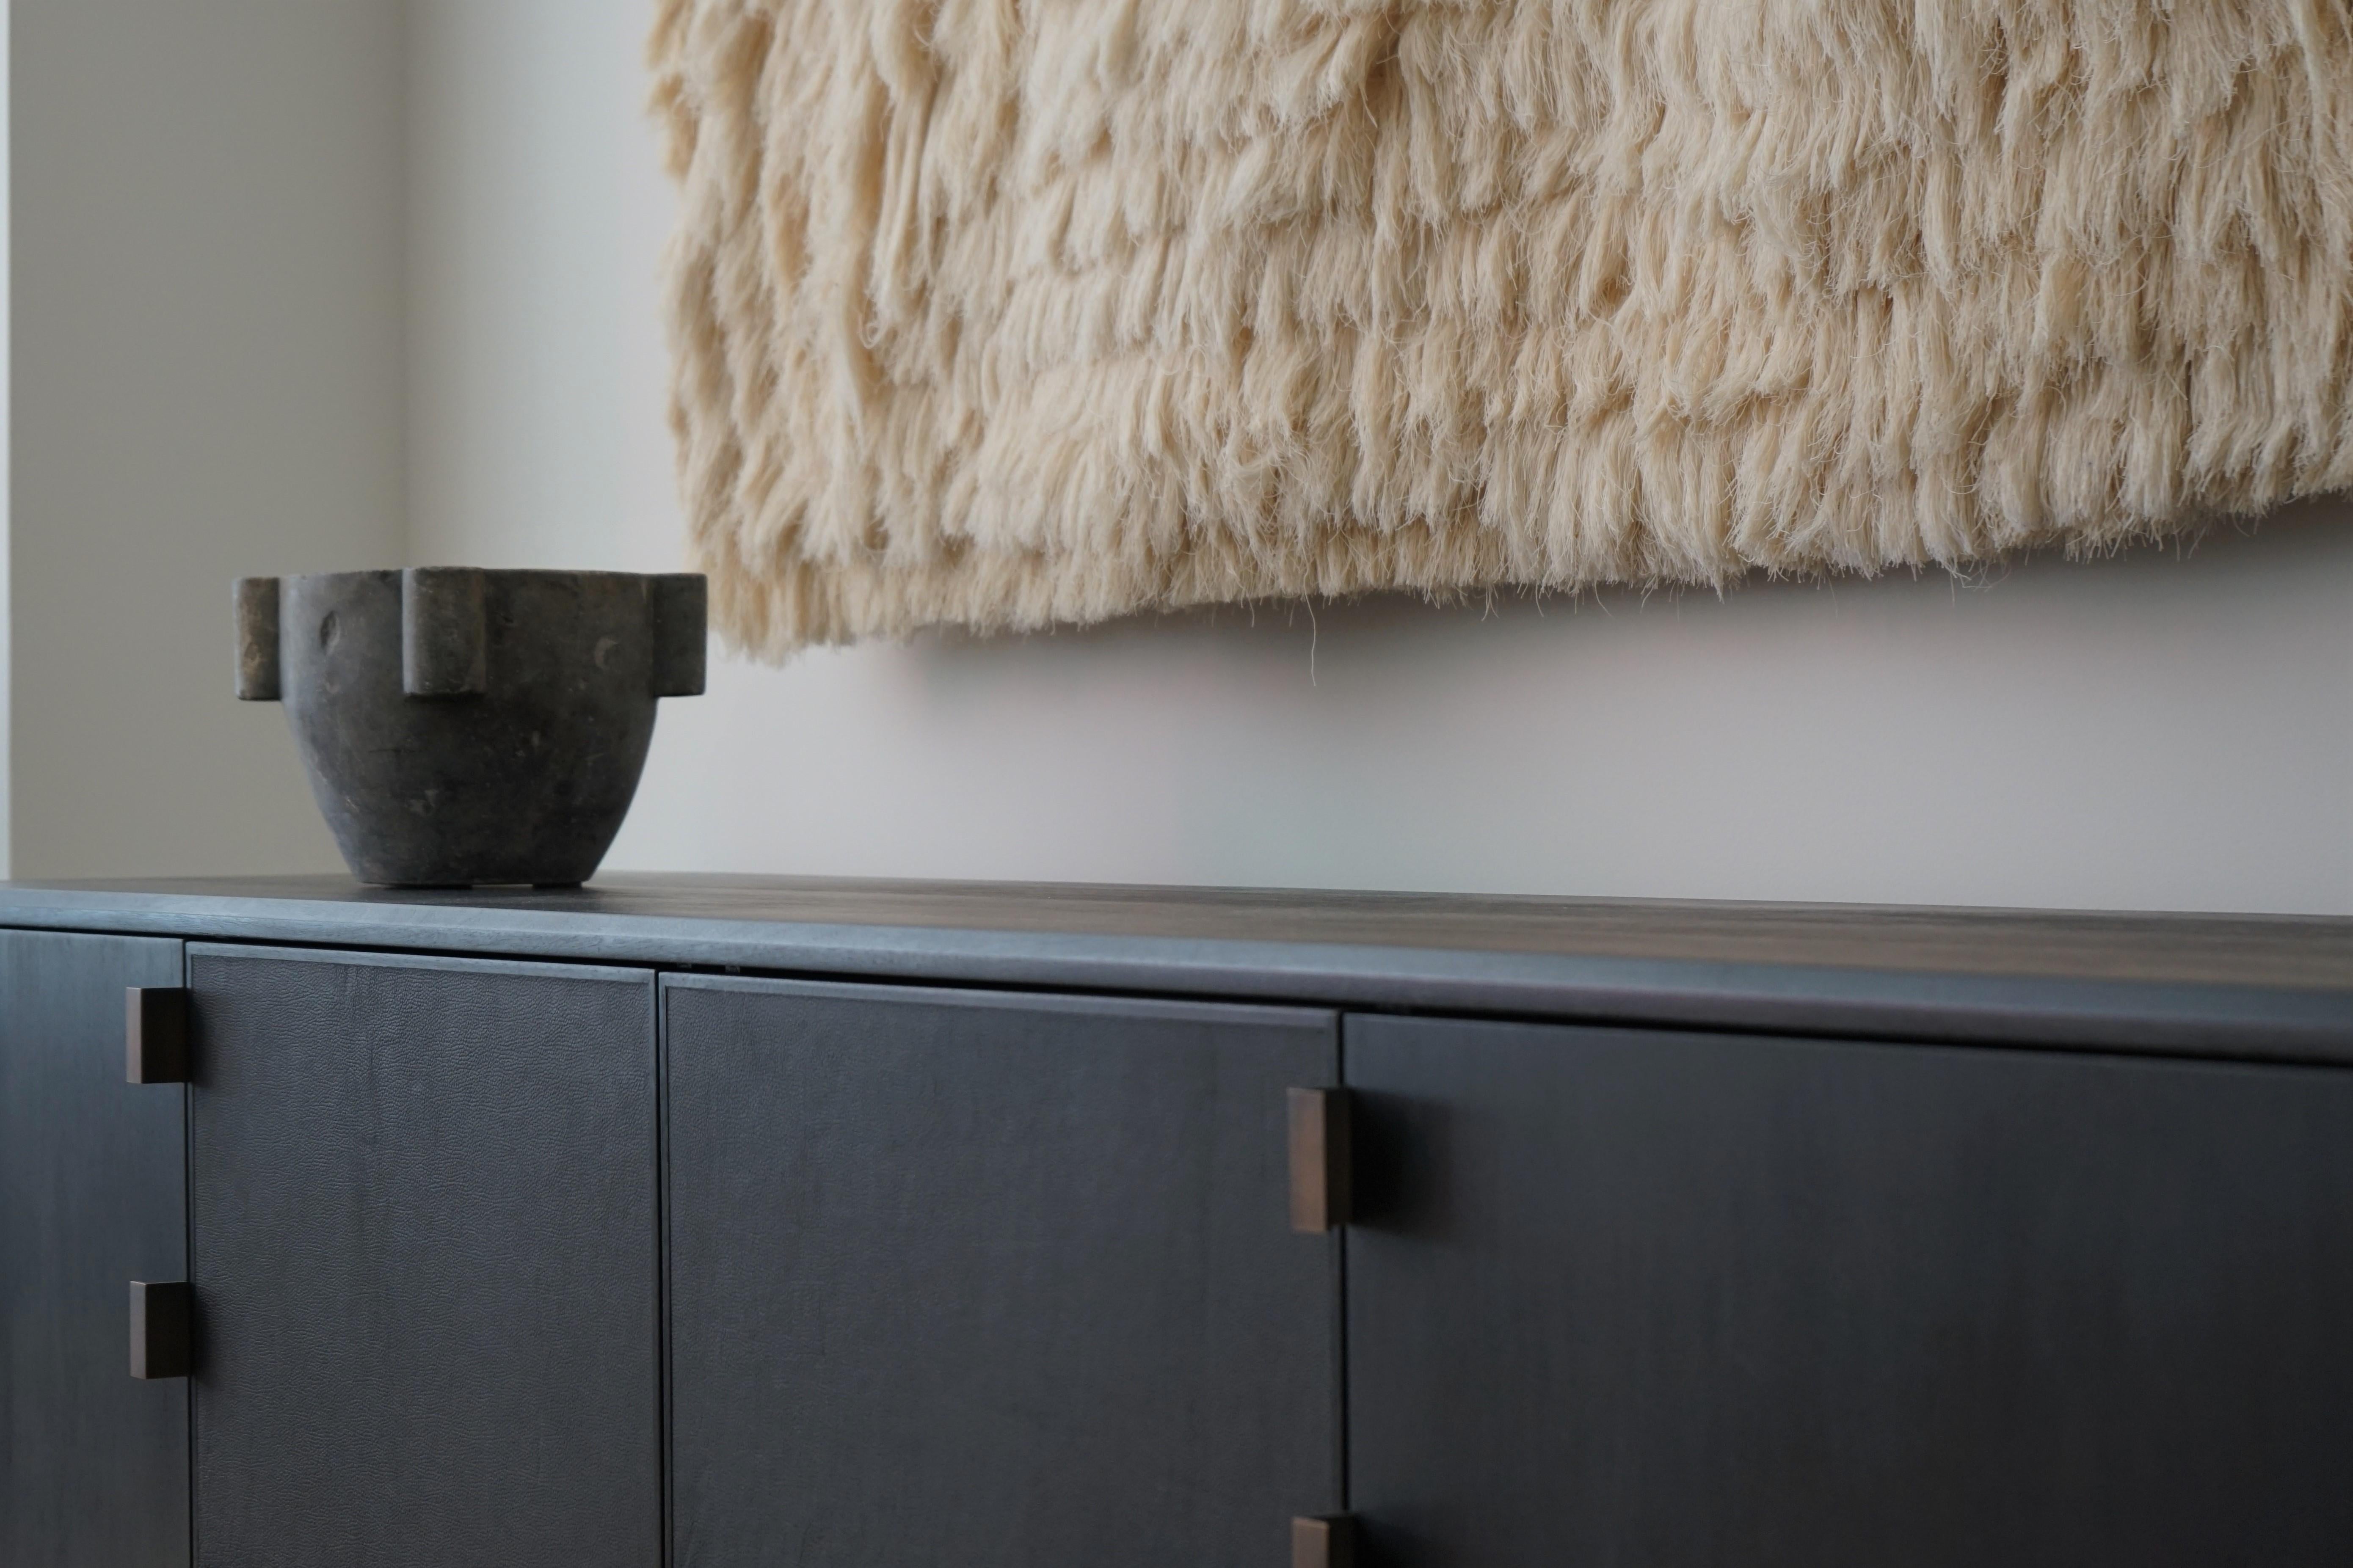 The design of the Augusto Credenza stems from the uniqueness of Mexican Brutalist architecture, itself a mix of pre-Columbian styles with 20th Century modern architecture and its European influences. The Medium size features two push-to-open, soft